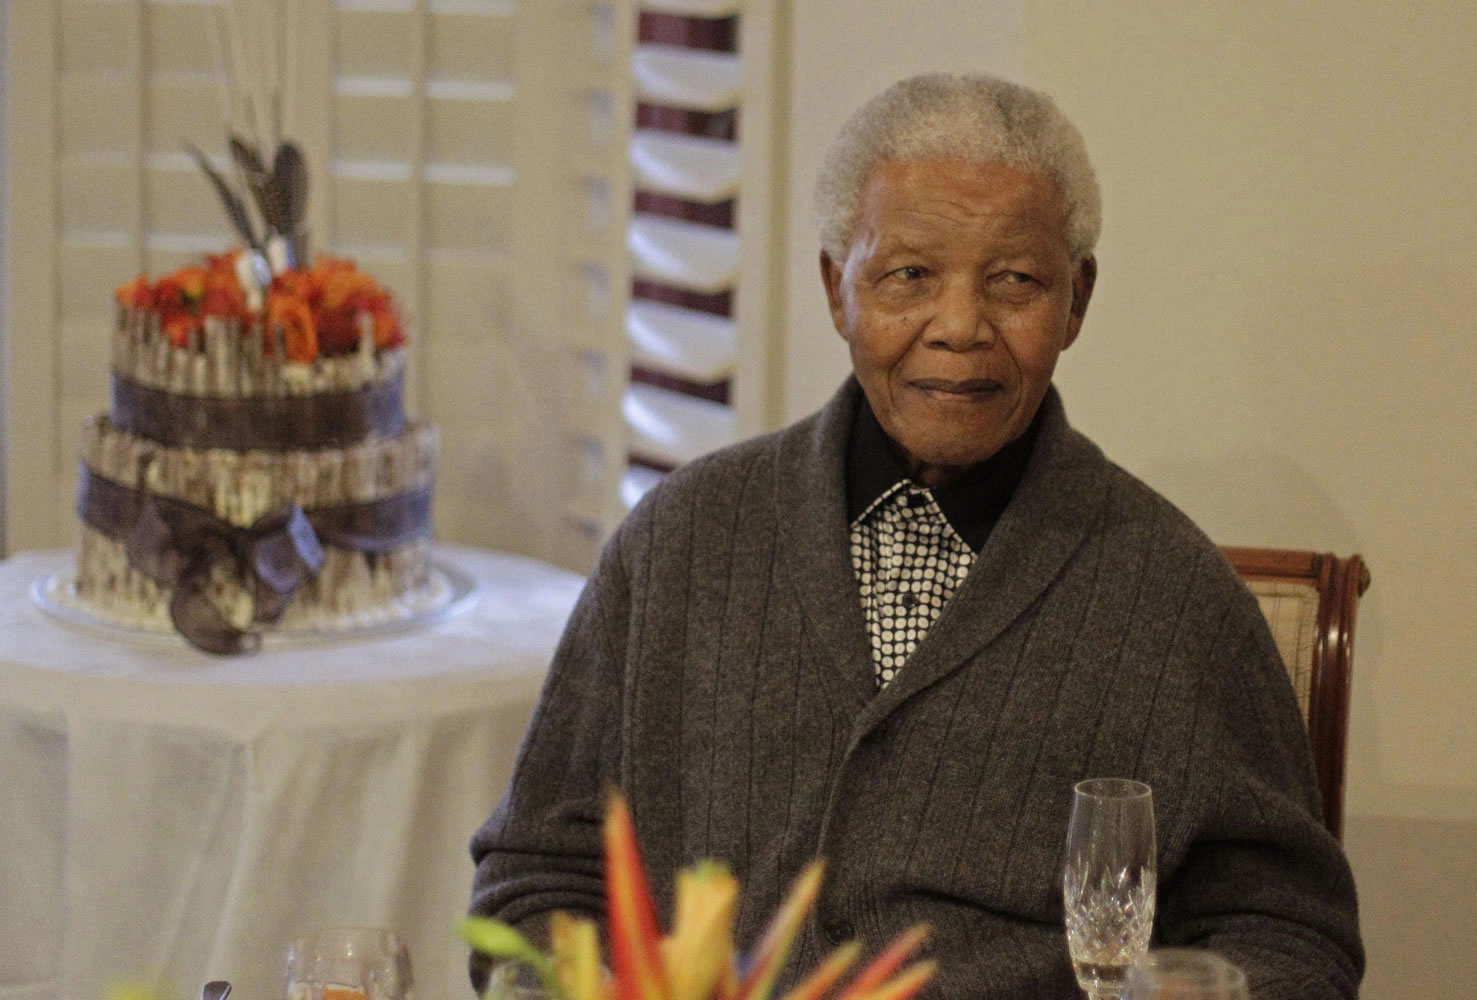 Former South African President Nelson Mandela celebrates his 94th birthday with family in Qunu, South Africa in 2012.